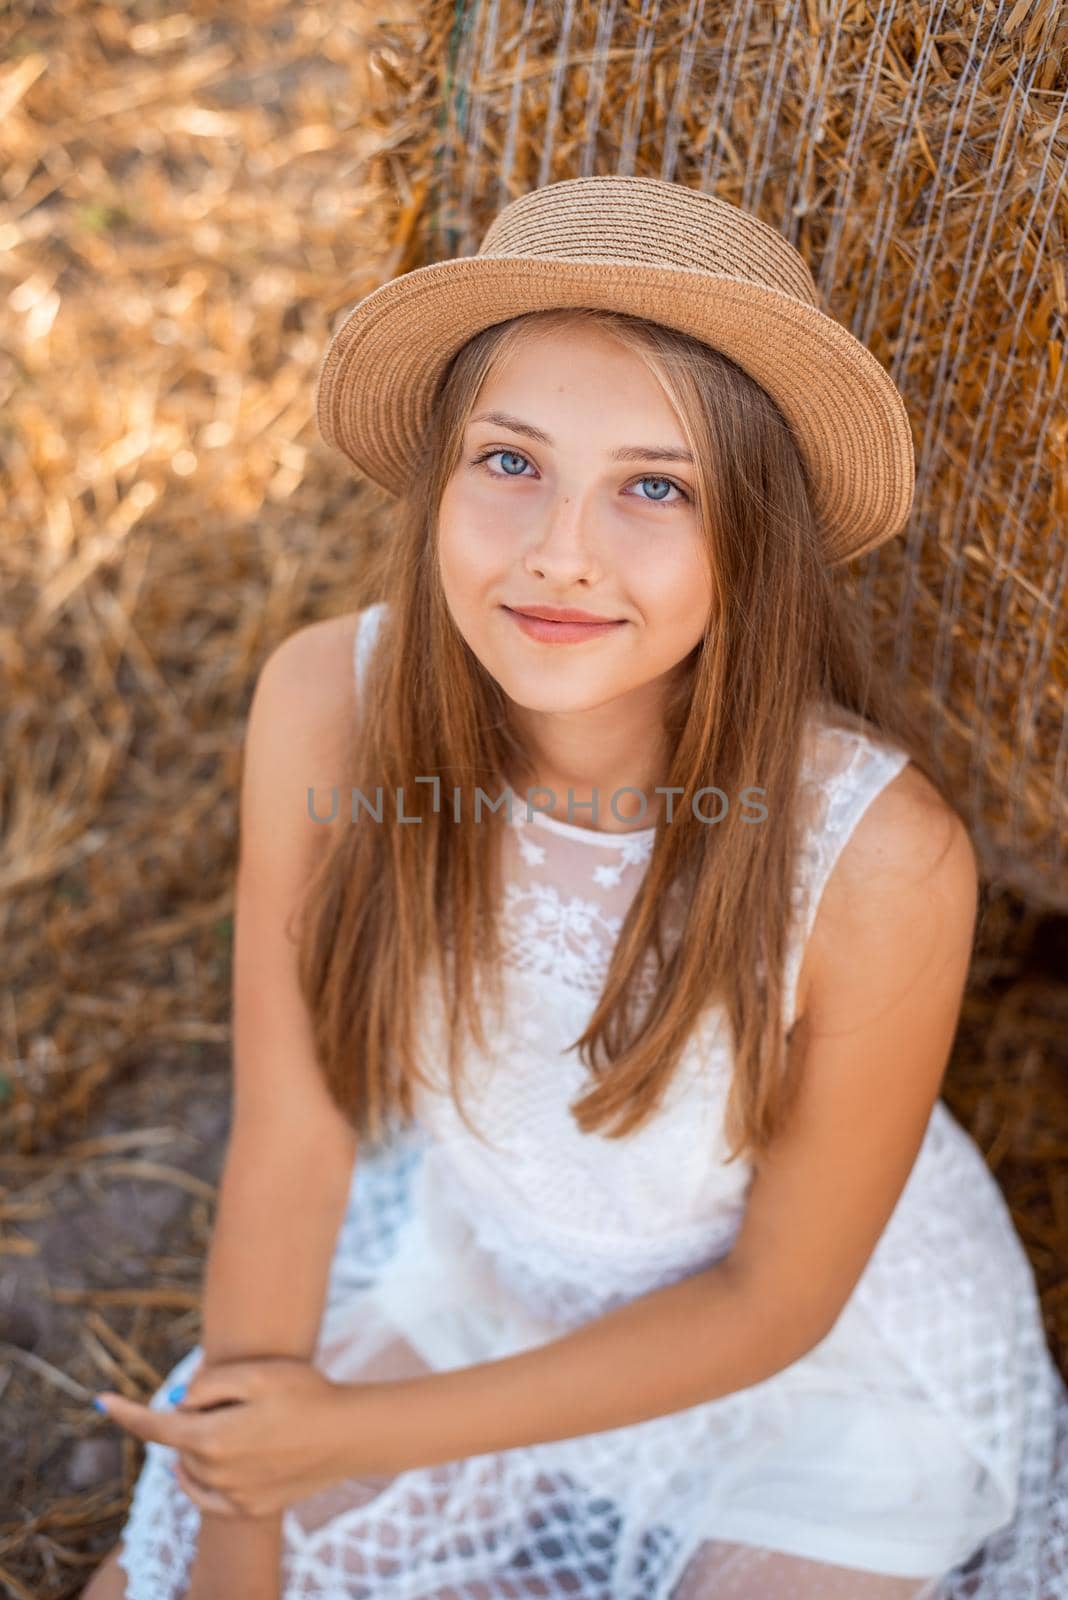 Outdoor photo of a beautiful girl